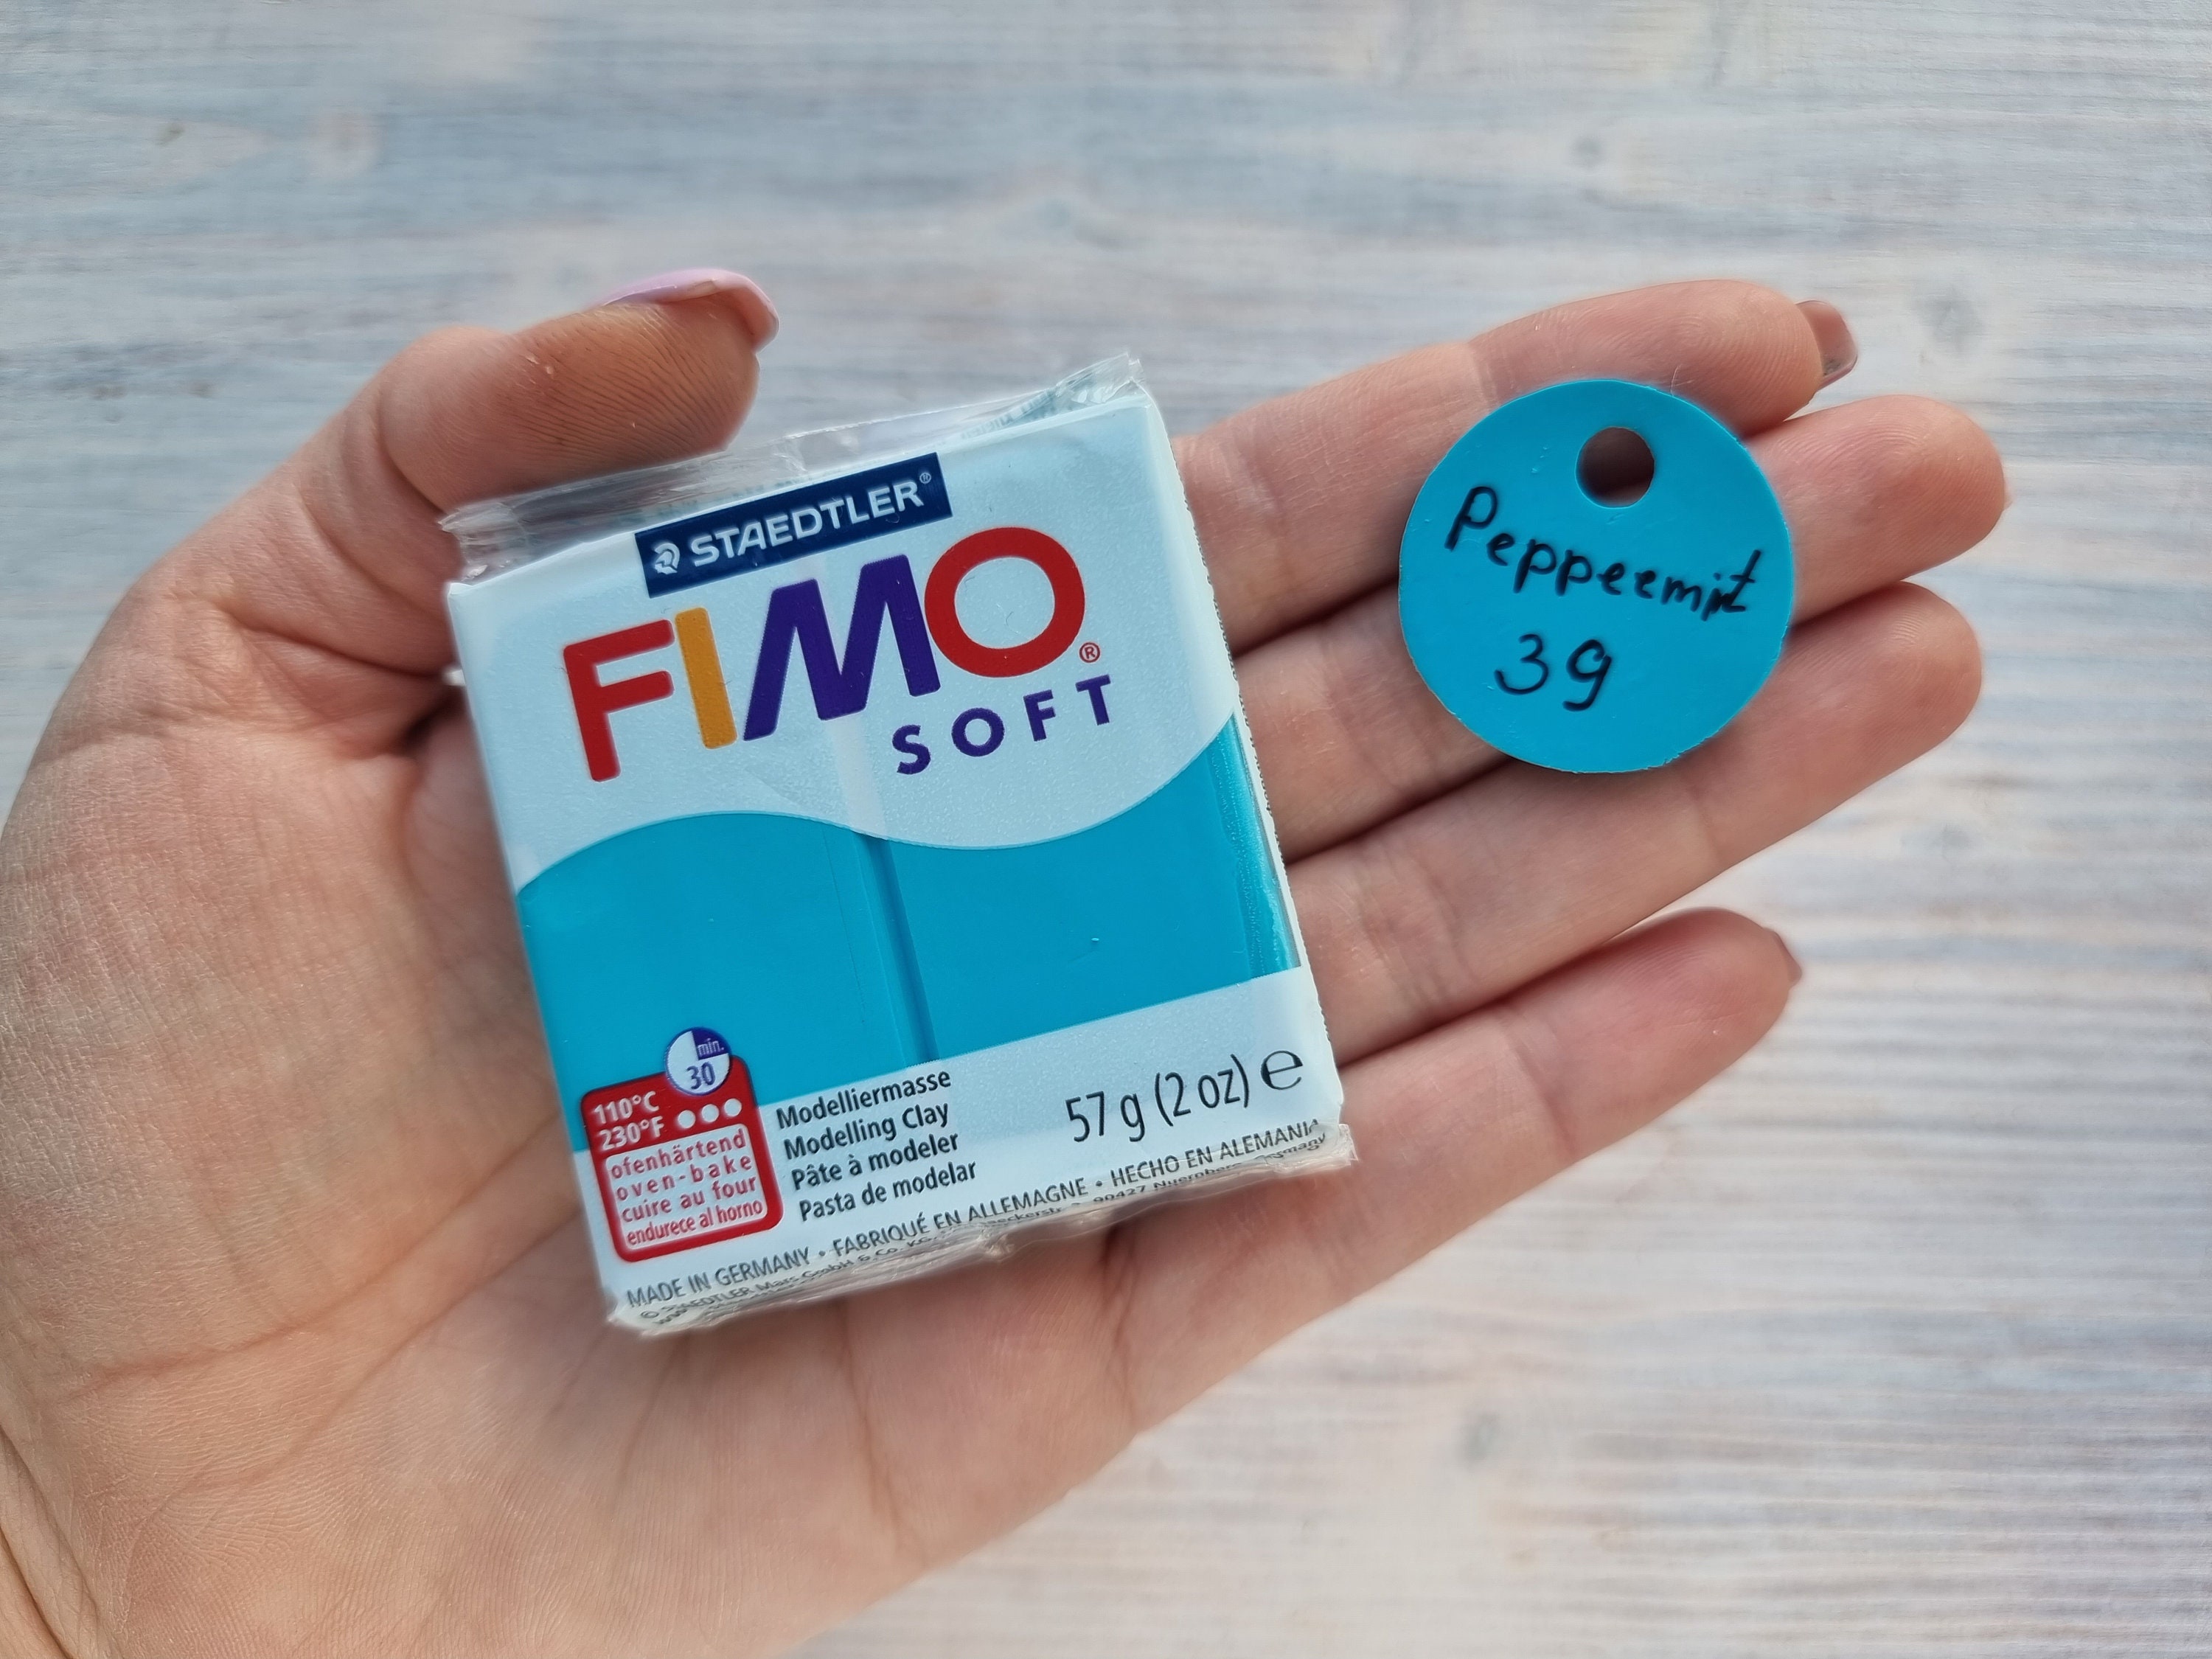 FIMO Soft Serie Polymer Clay, Purpure, Nr. 61, 57g 2oz, Oven-hardening  Polymer Modeling Clay, Basic Fimo Soft Colors by STAEDTLER -  Finland